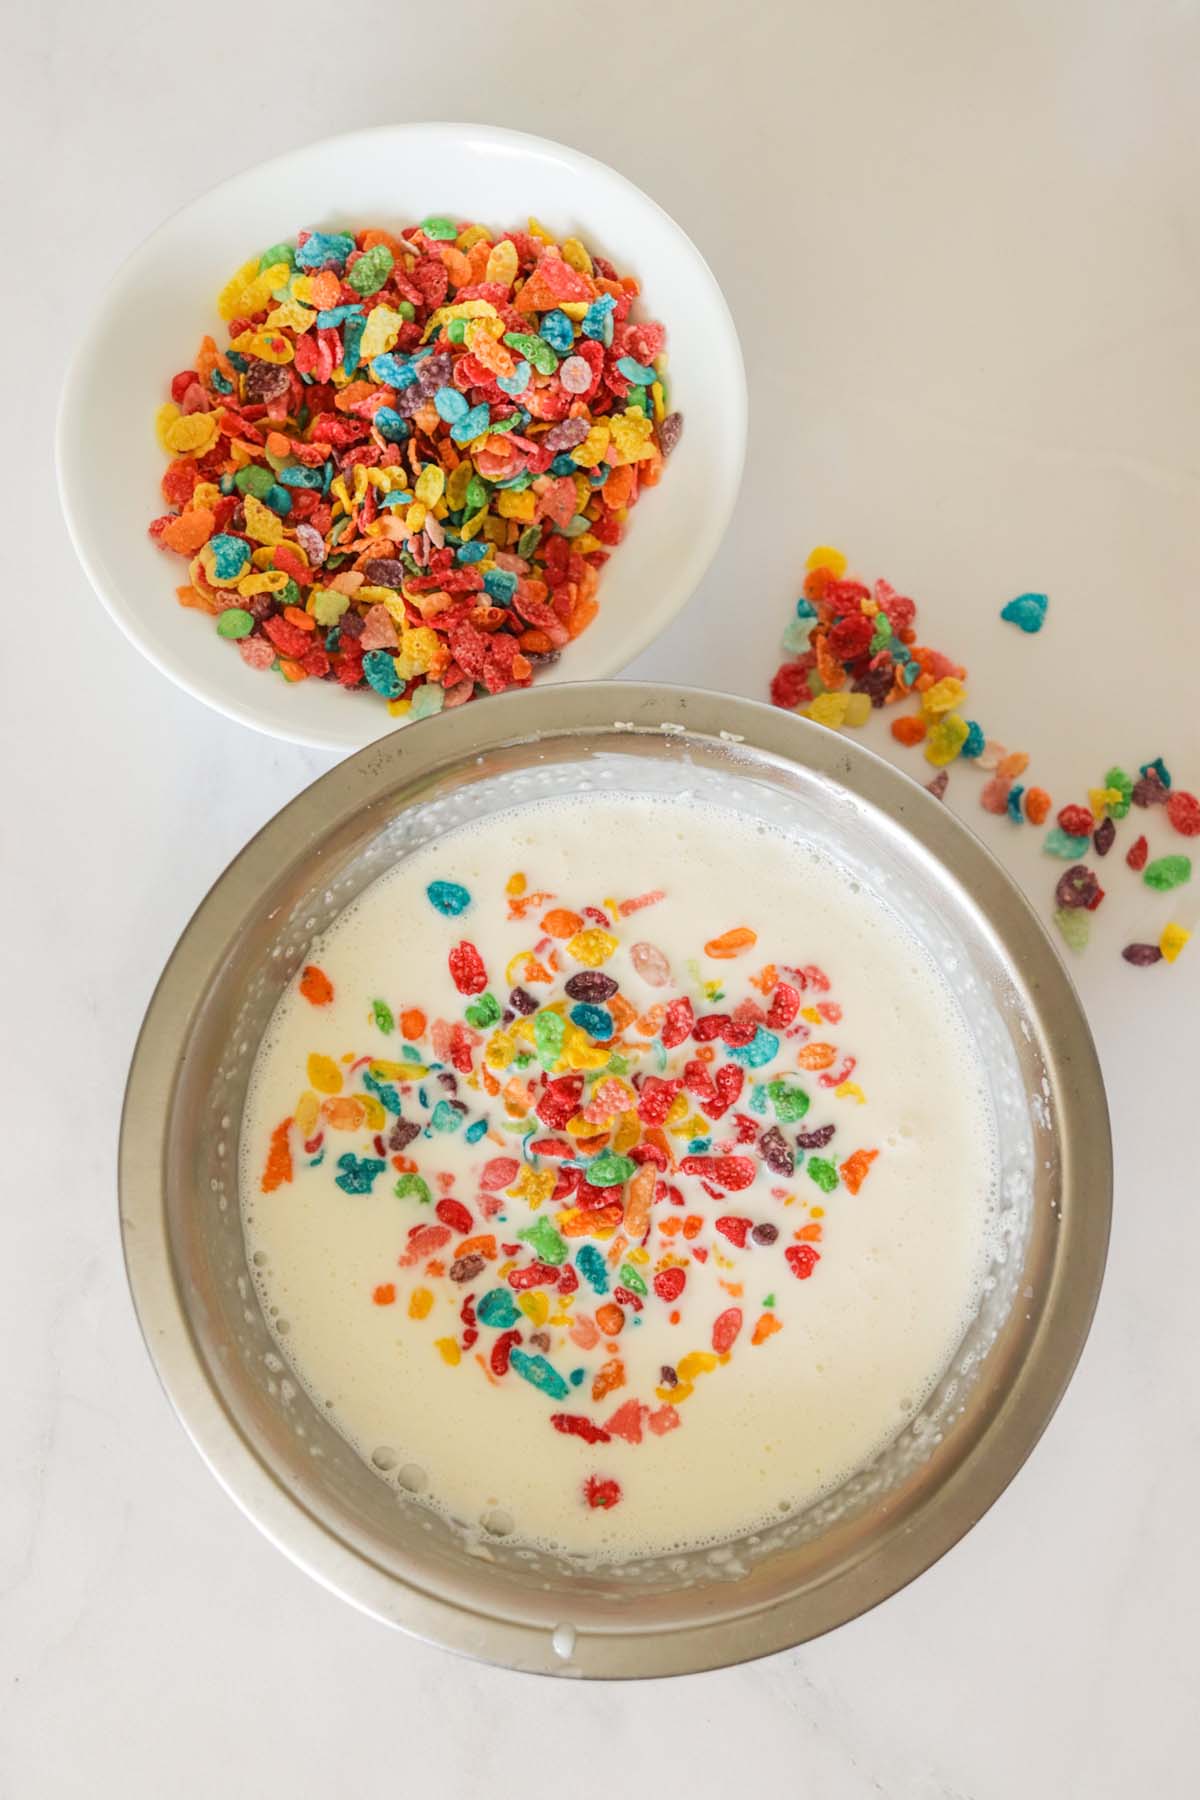 Fruity Pebbles cereal on top of the ice cream mixture.